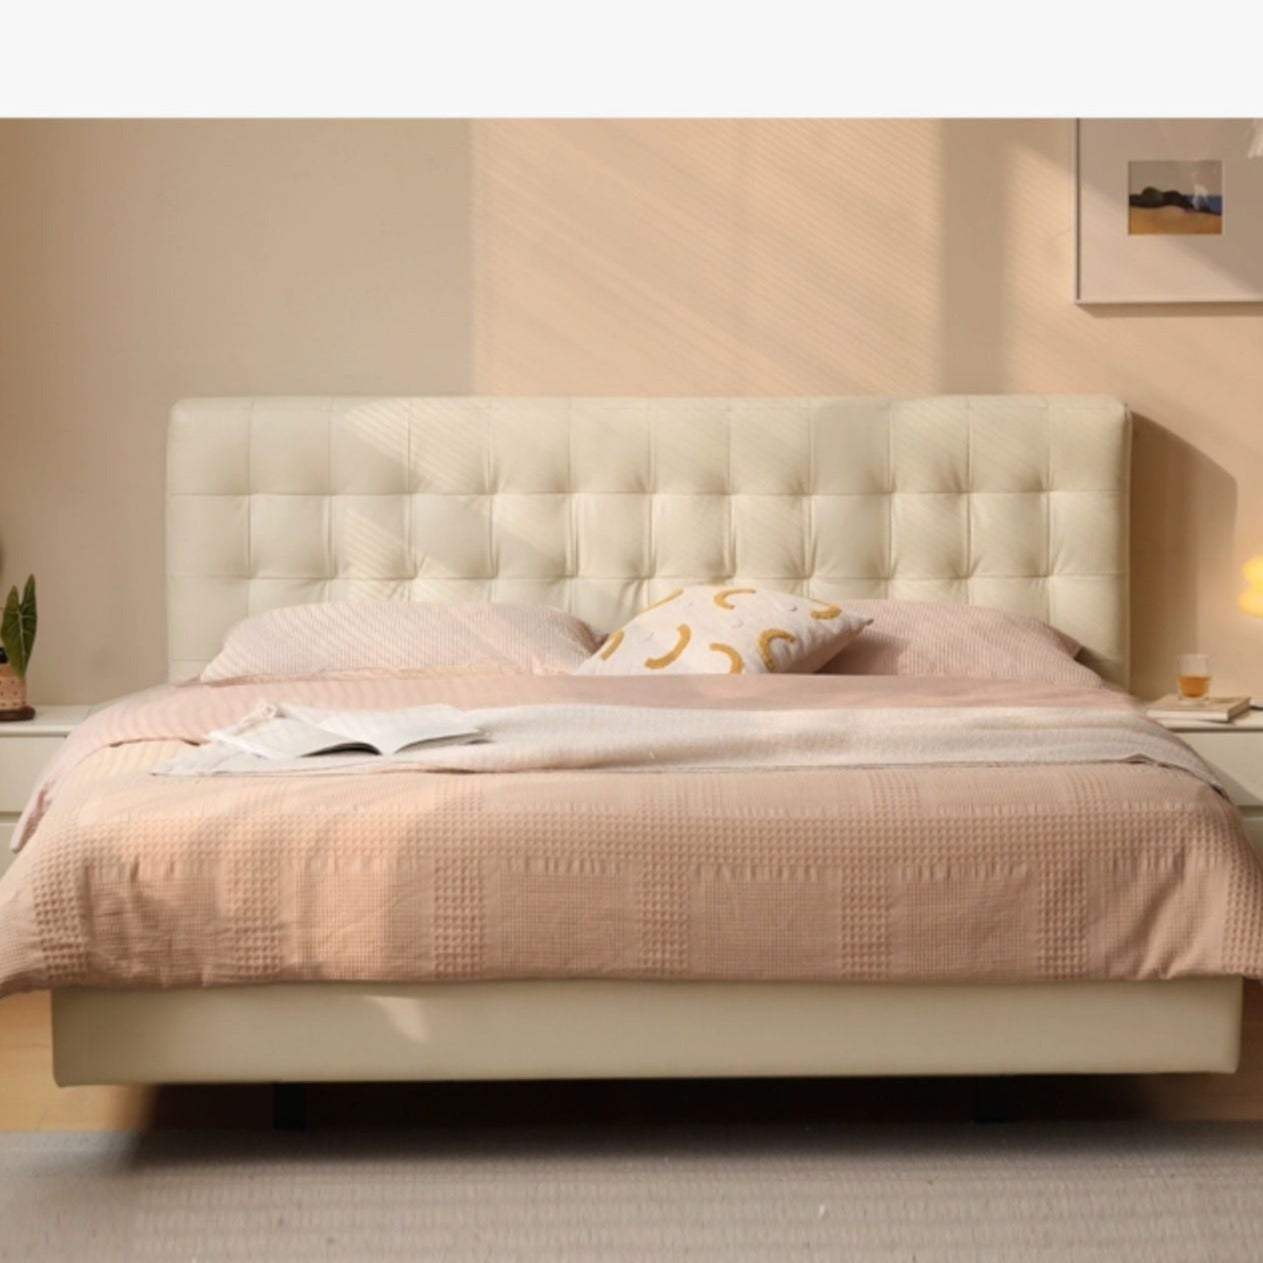 Suspended Organic Leather Bed, Genuine Leather Bed"_)